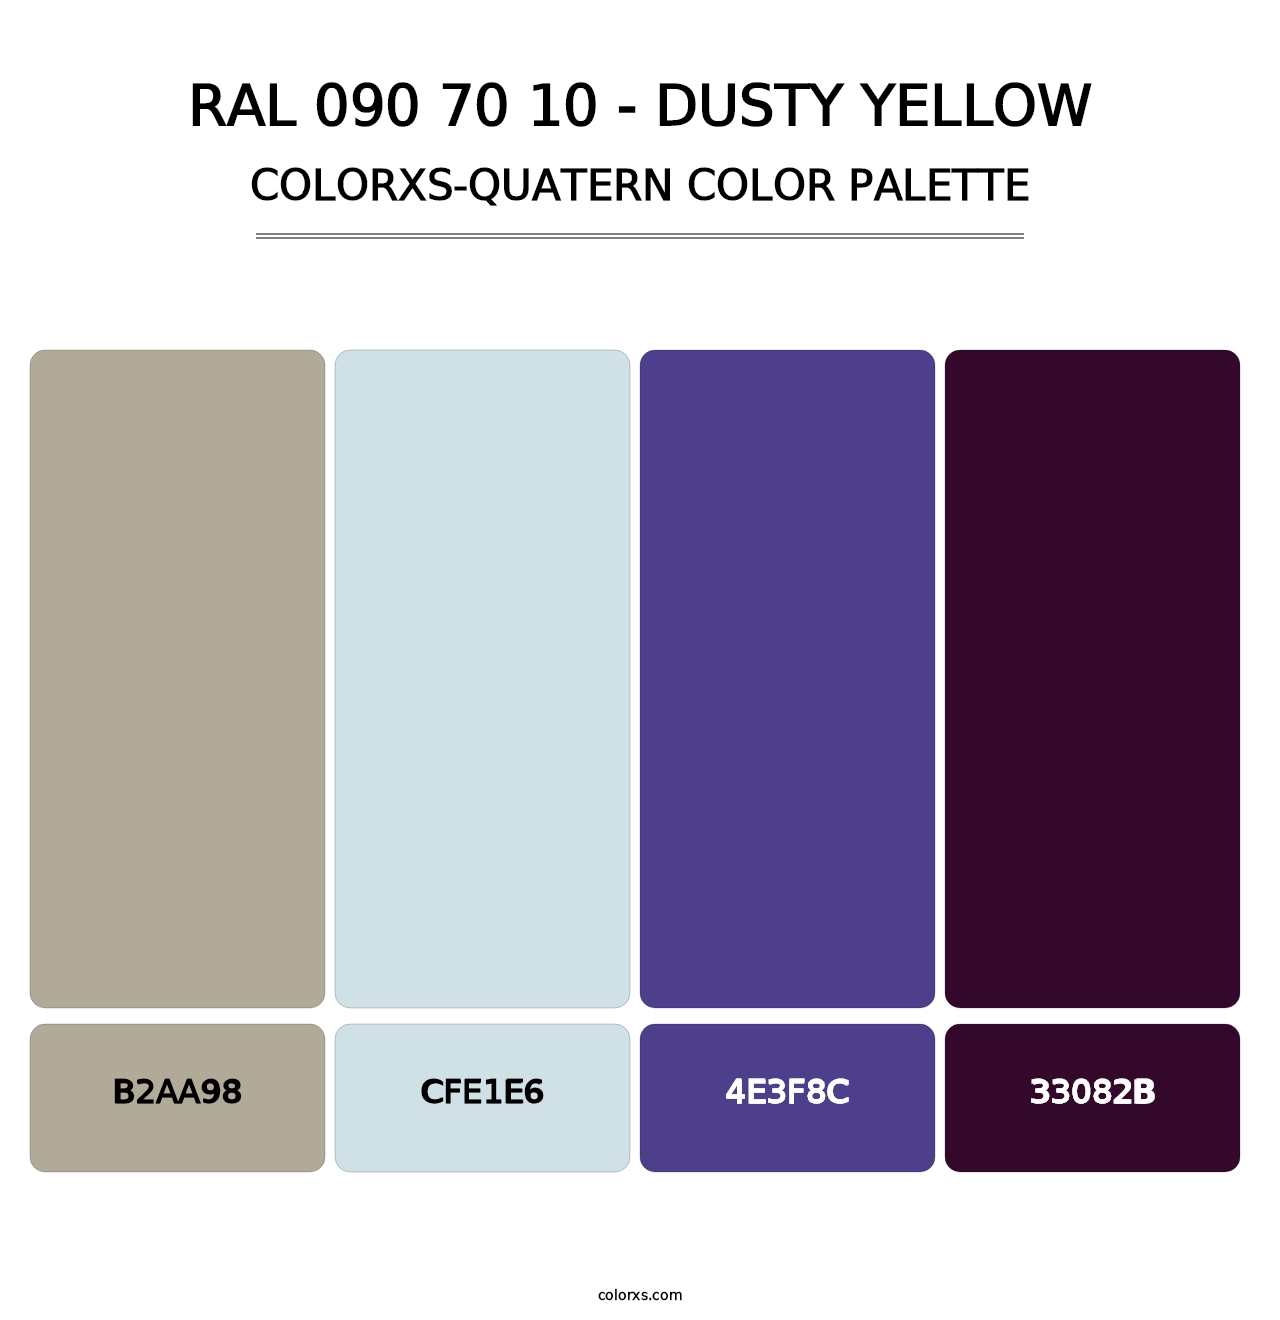 RAL 090 70 10 - Dusty Yellow - Colorxs Quatern Palette